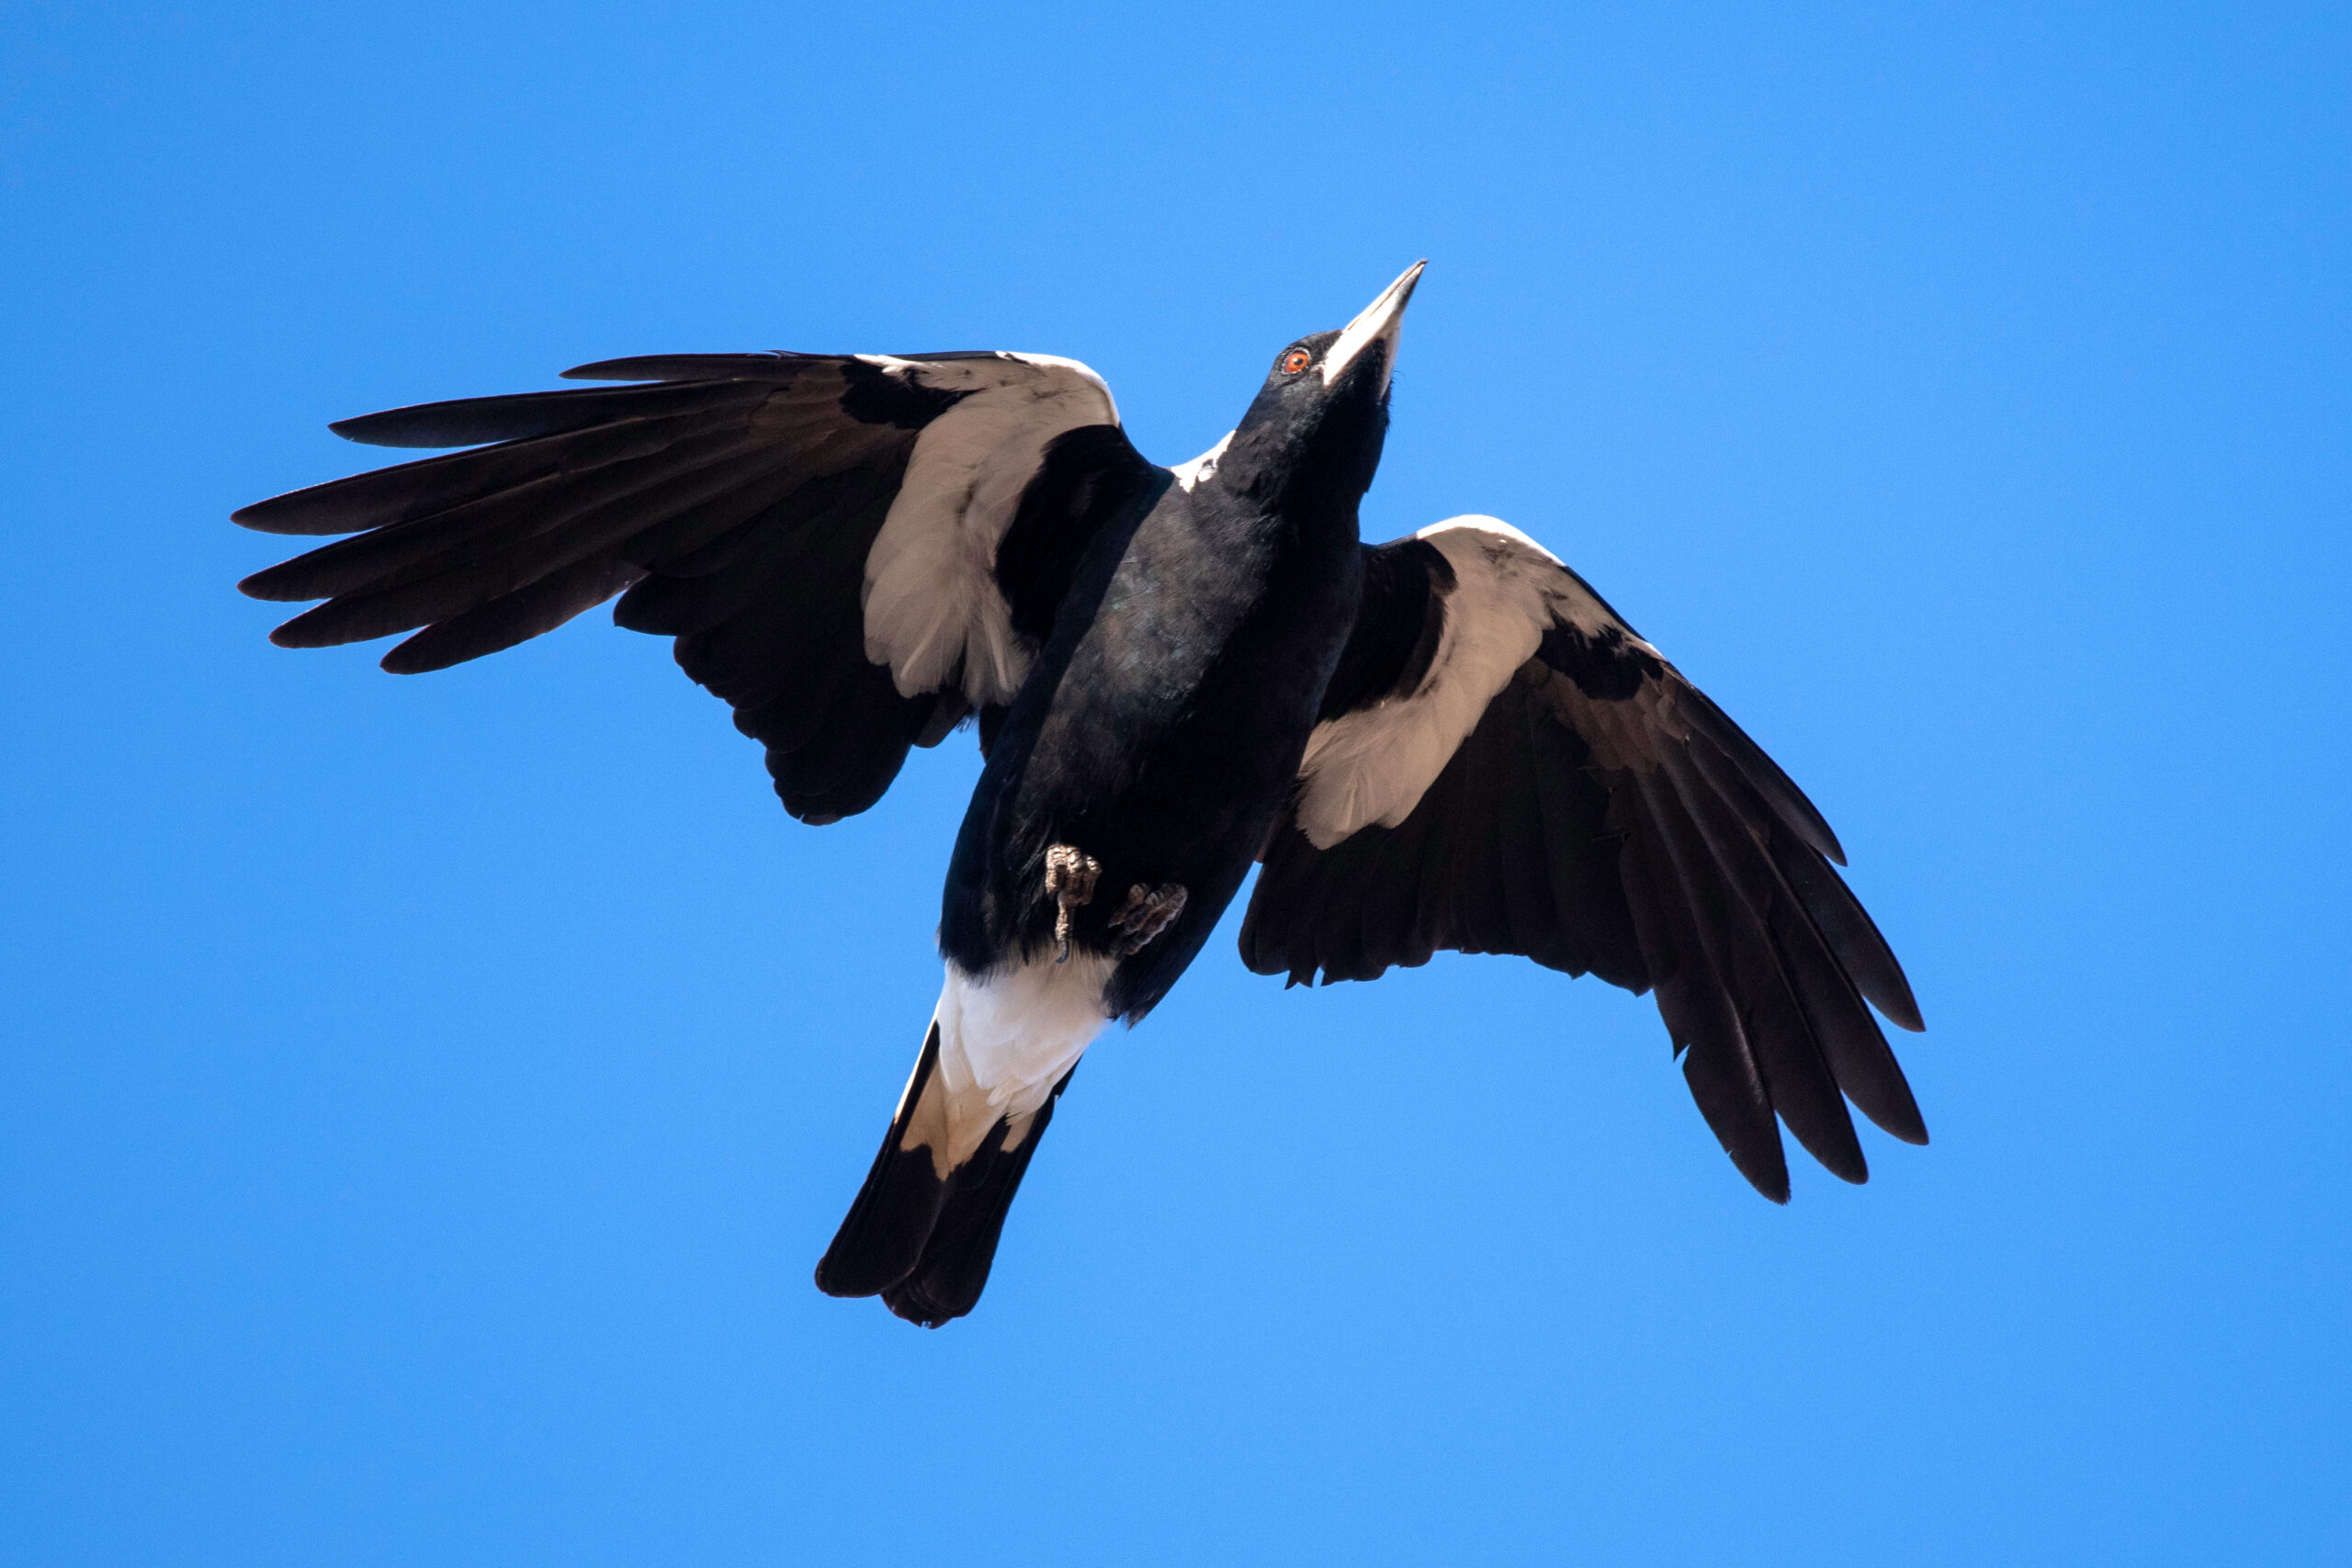 A photo of a magpie in flight, taken from underneath. The bird is mostly black, with some white feathers on it’s wings and tail. Its beak is a light grey colour. The background is the blue sky.